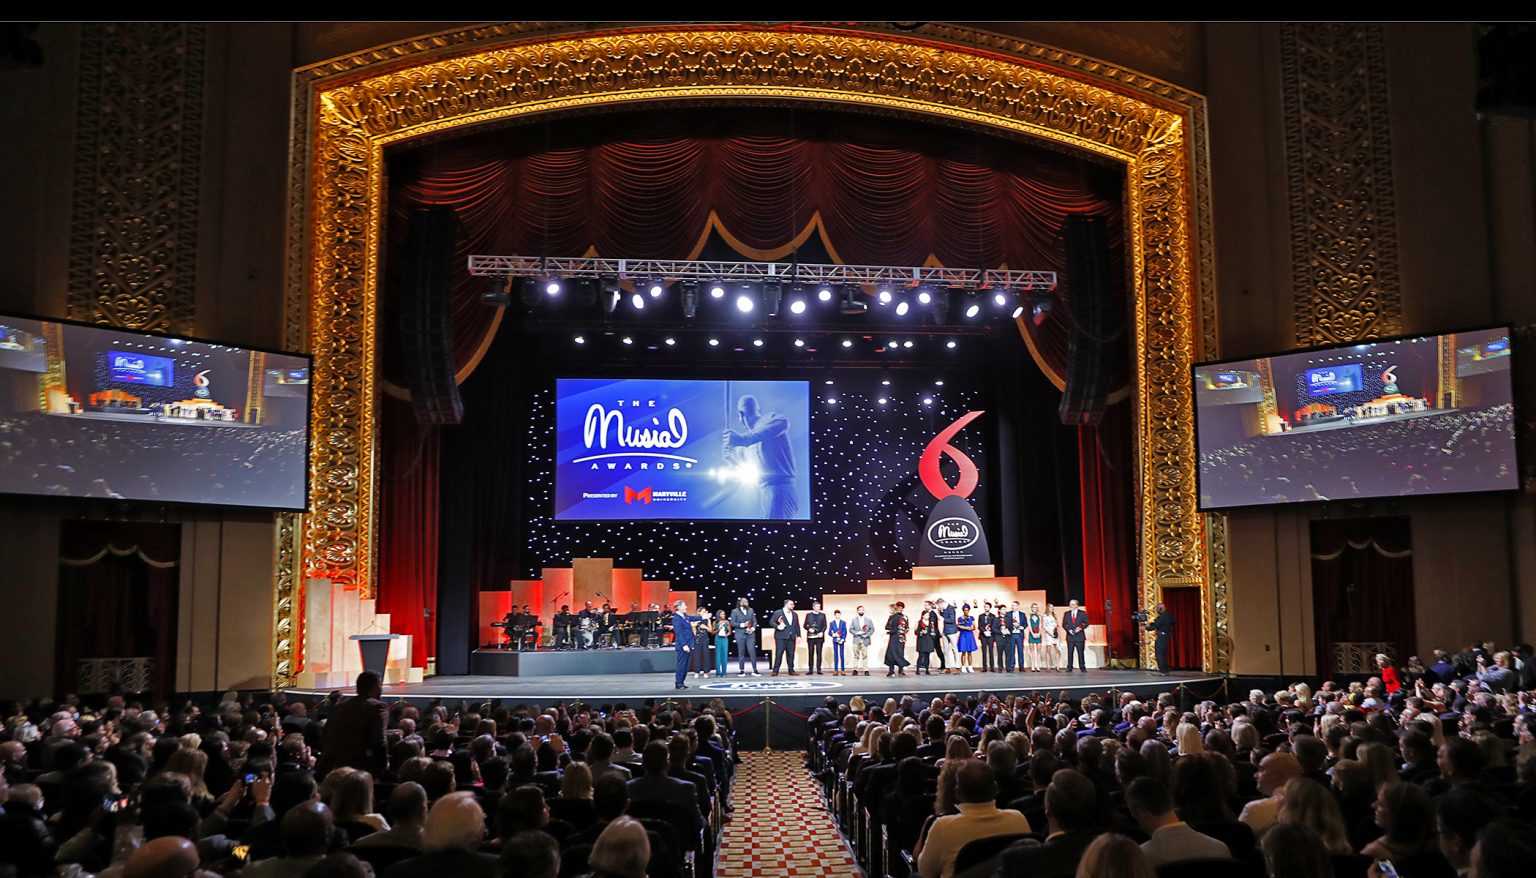 About The Musial Awards Musial Awards